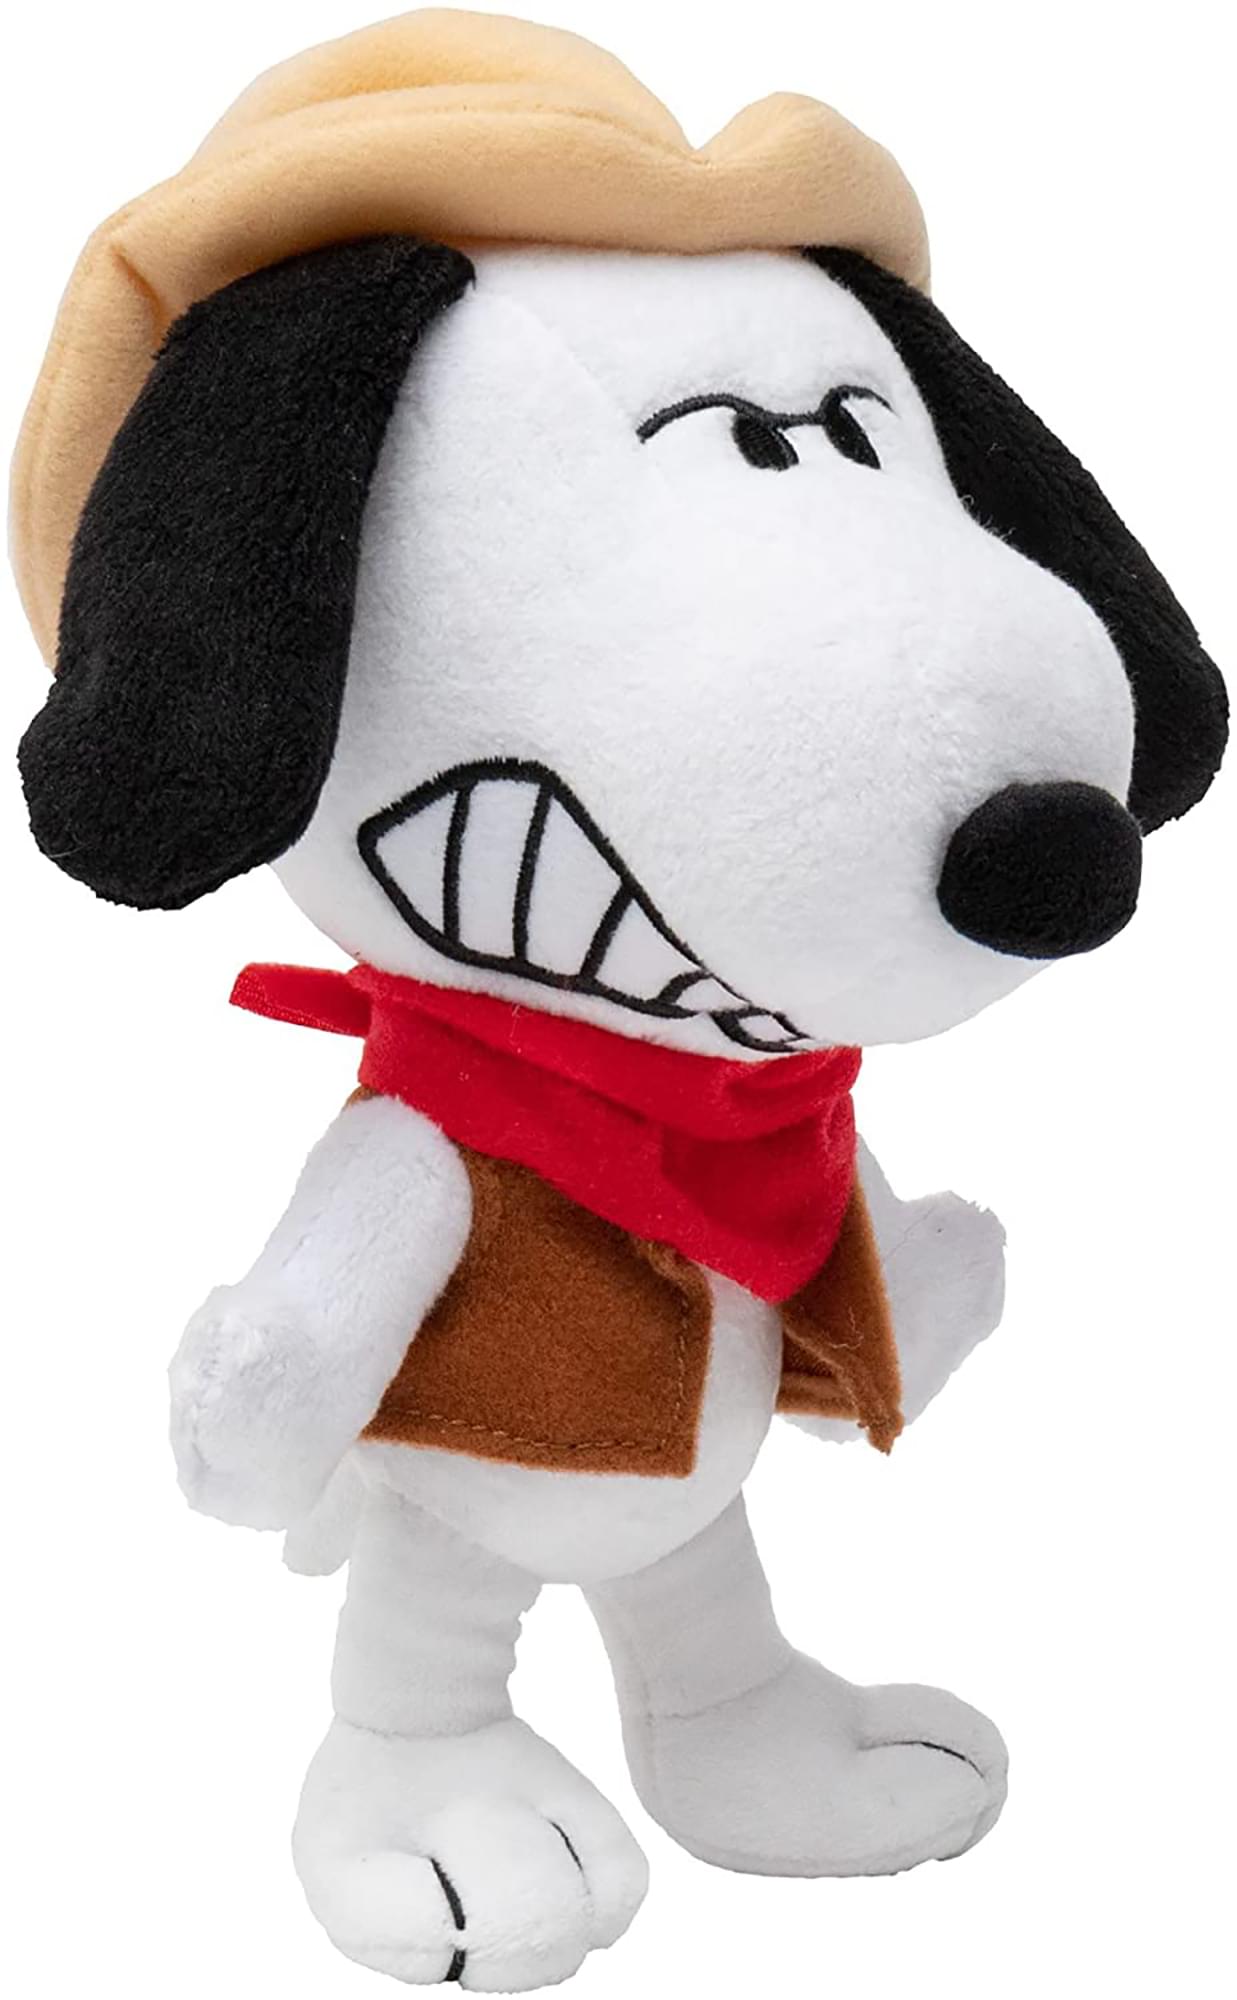 The Snoopy Show 7.5 Inch Plush | Cowboy Snoopy